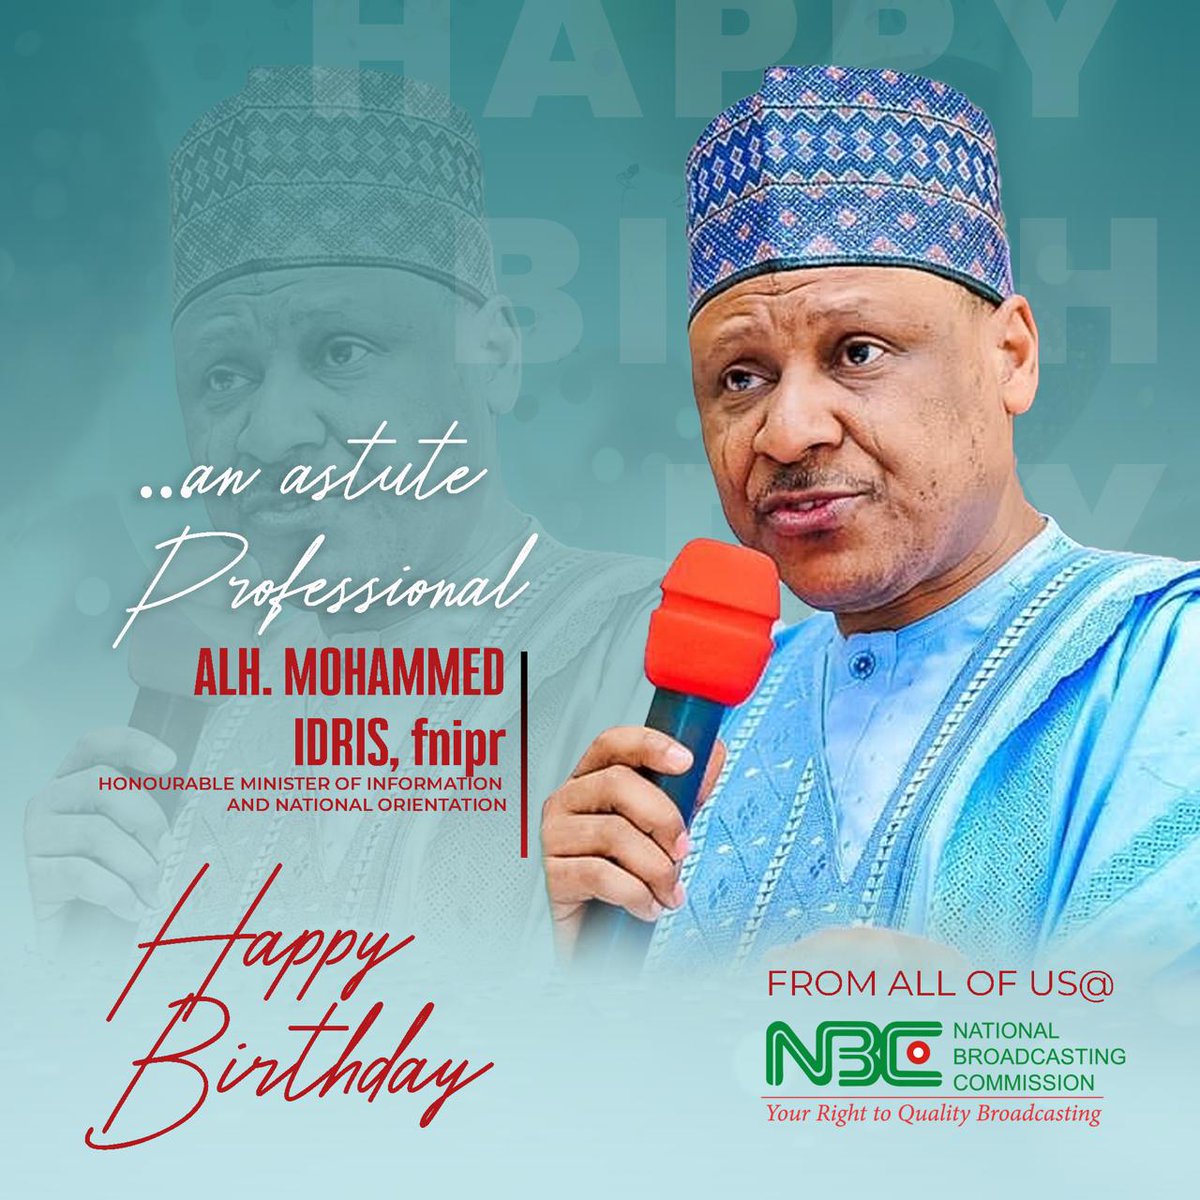 NBC Congratulates the Hon. Minister of Information and National Orientation @HMMohammedIdris on the occasion of his birthday.